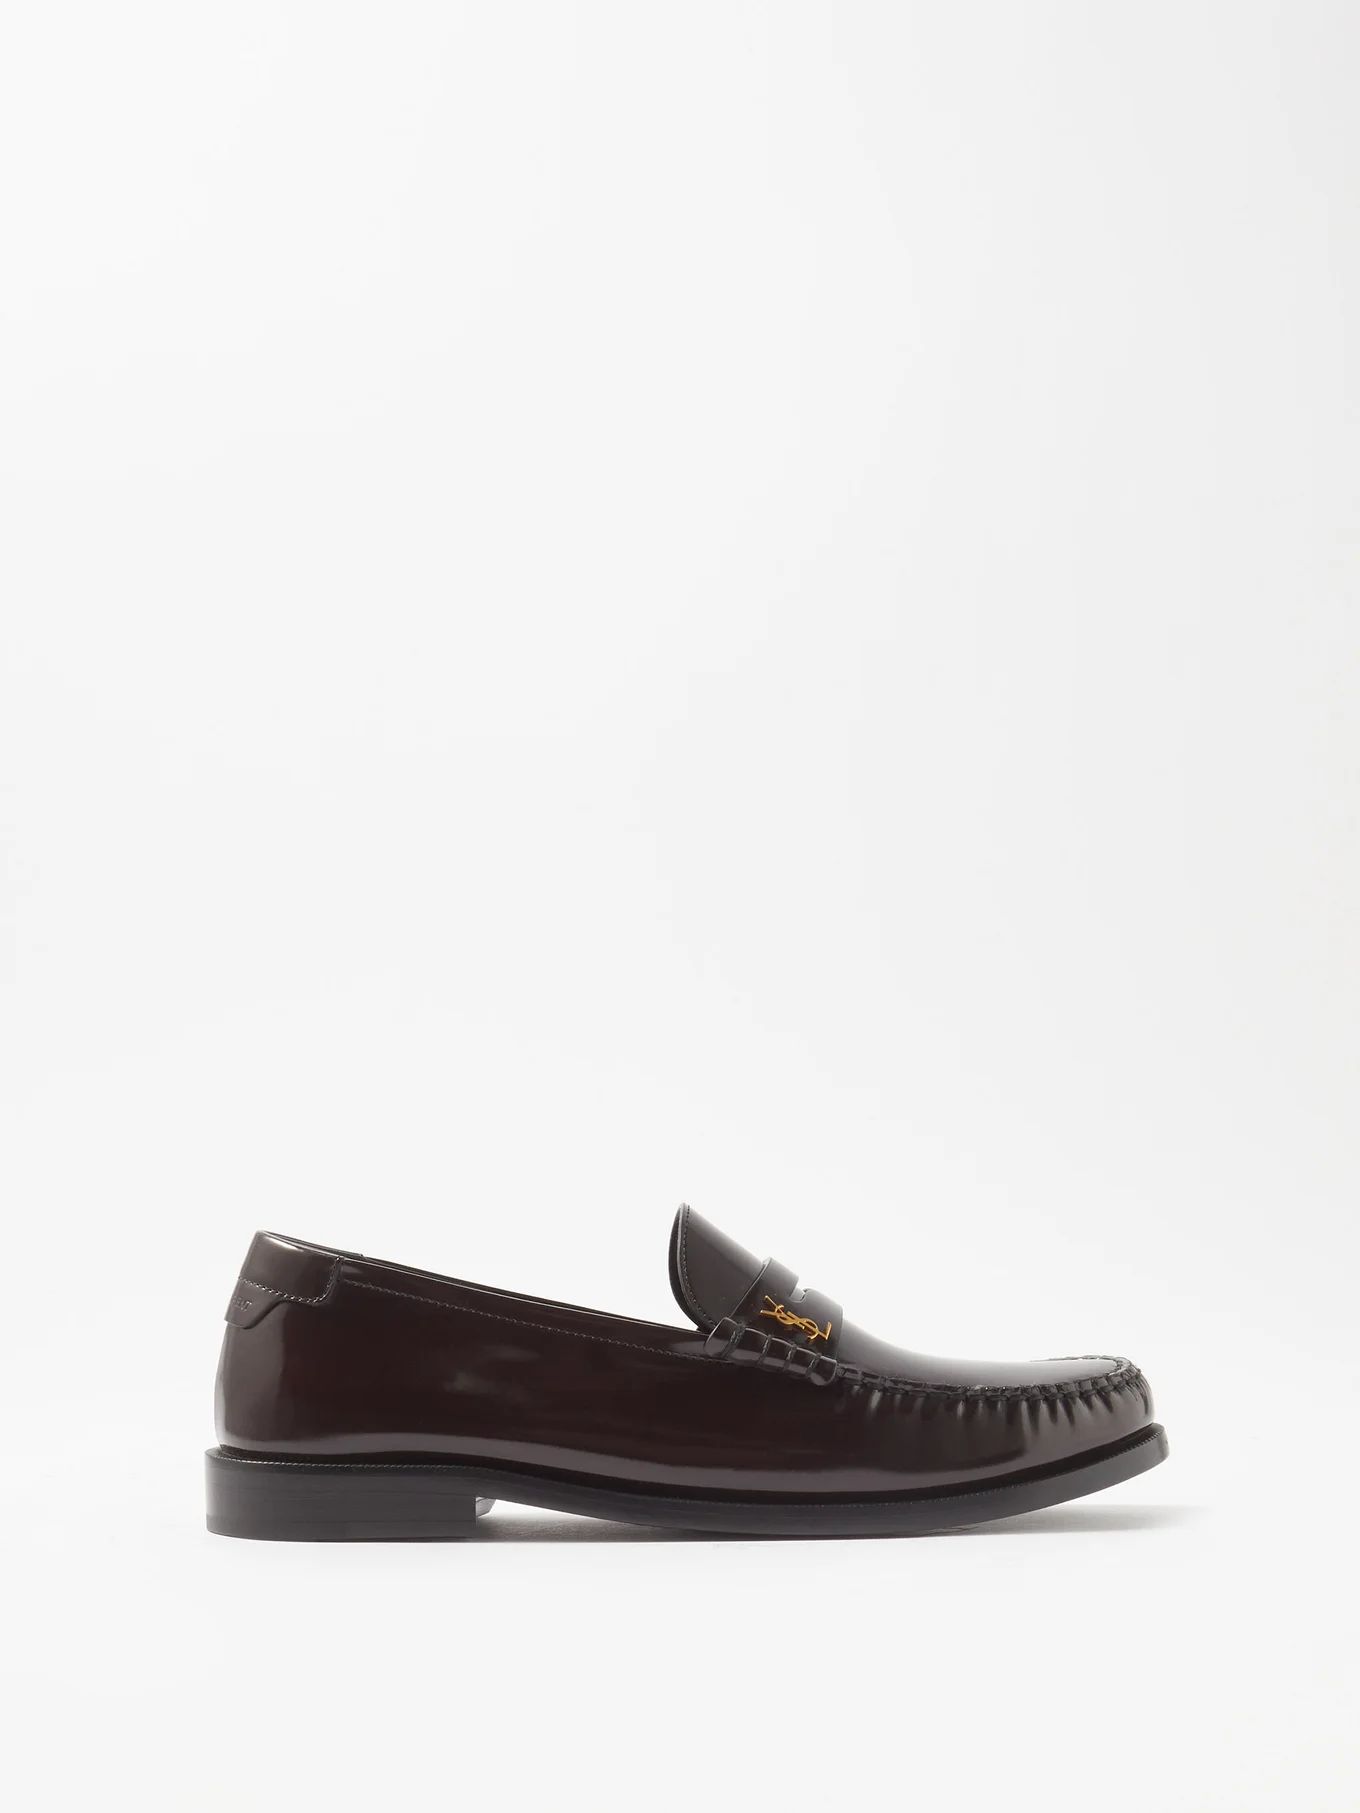 Le Loafer YSL-logo leather loafers | Saint Laurent | Matches (UK)